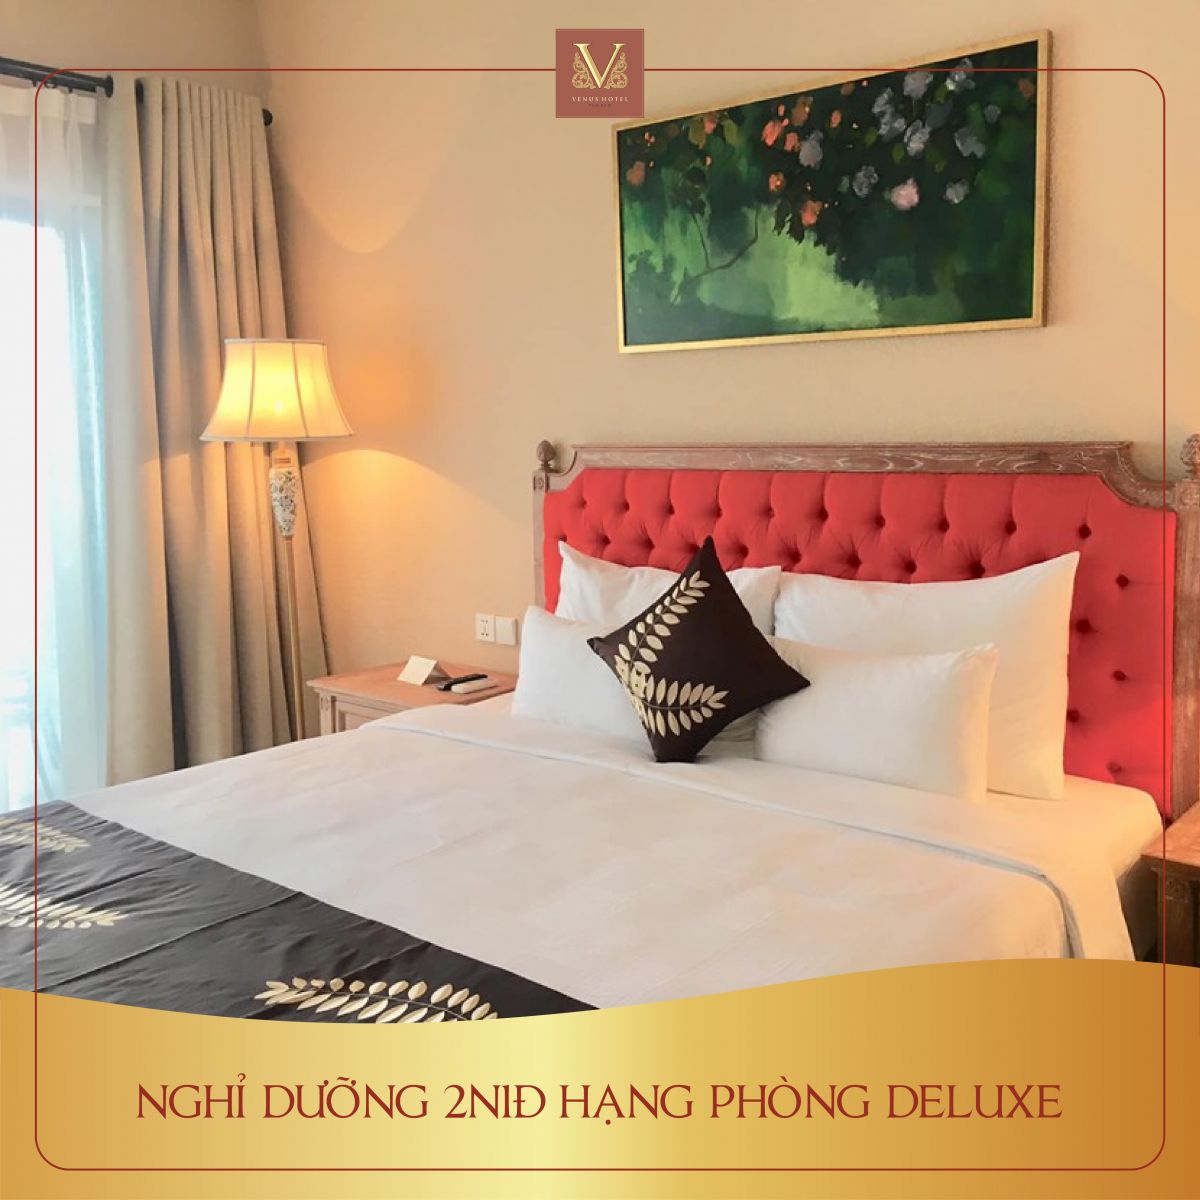 Hạng phòng Deluxe